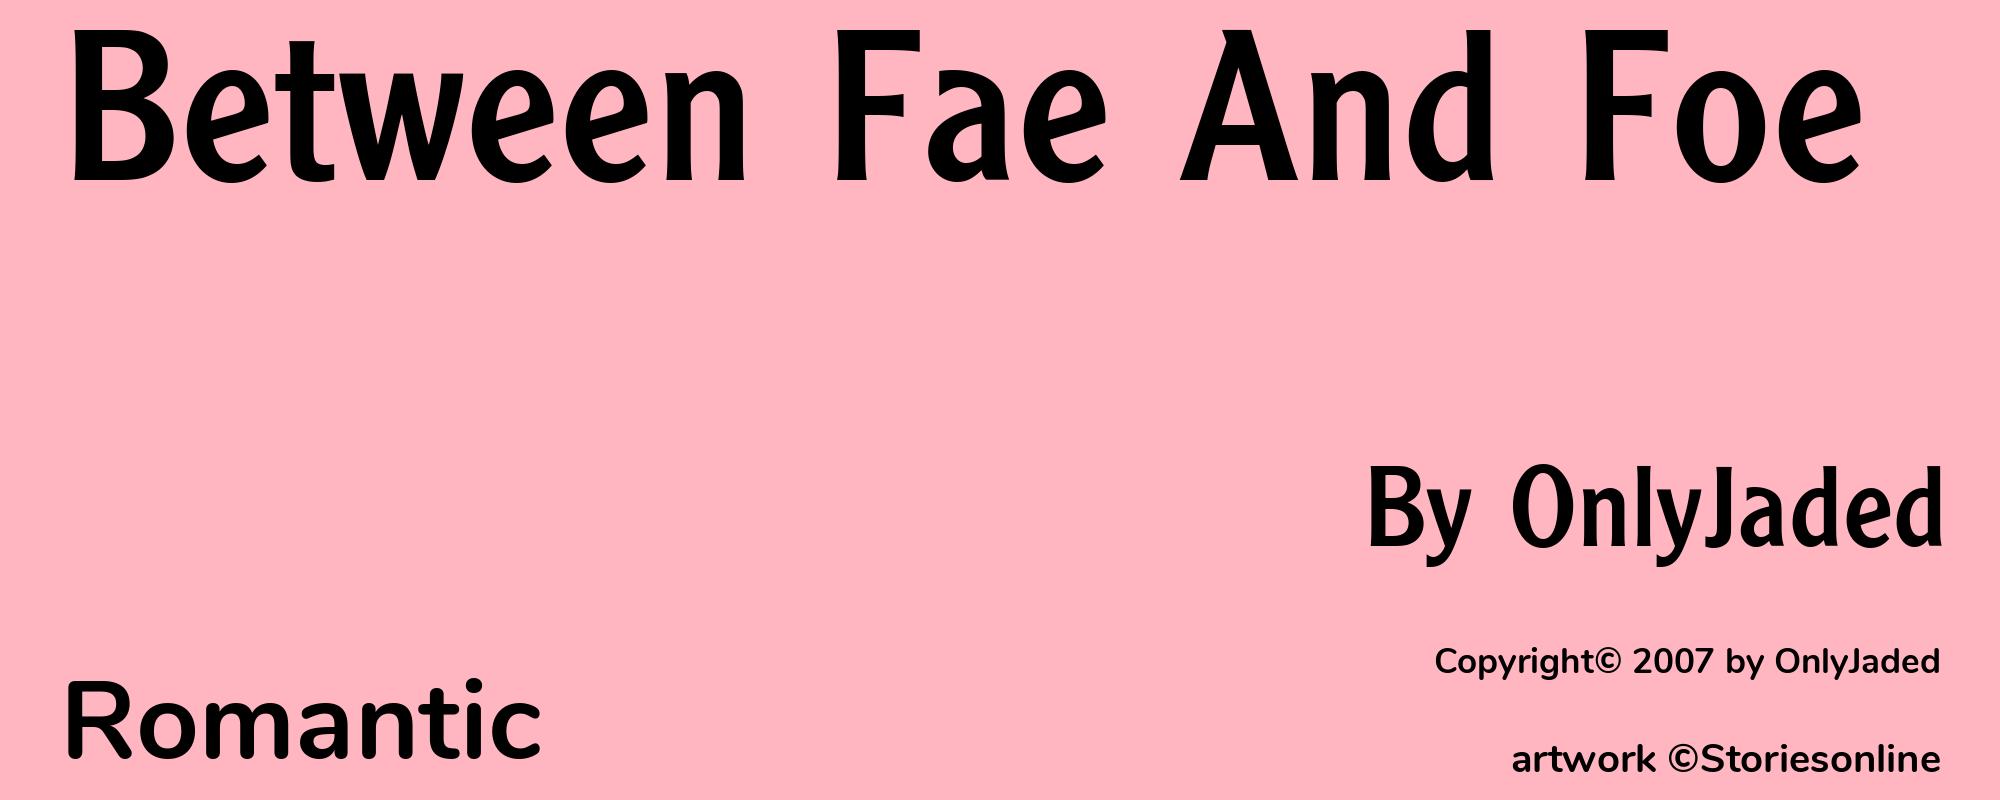 Between Fae And Foe - Cover